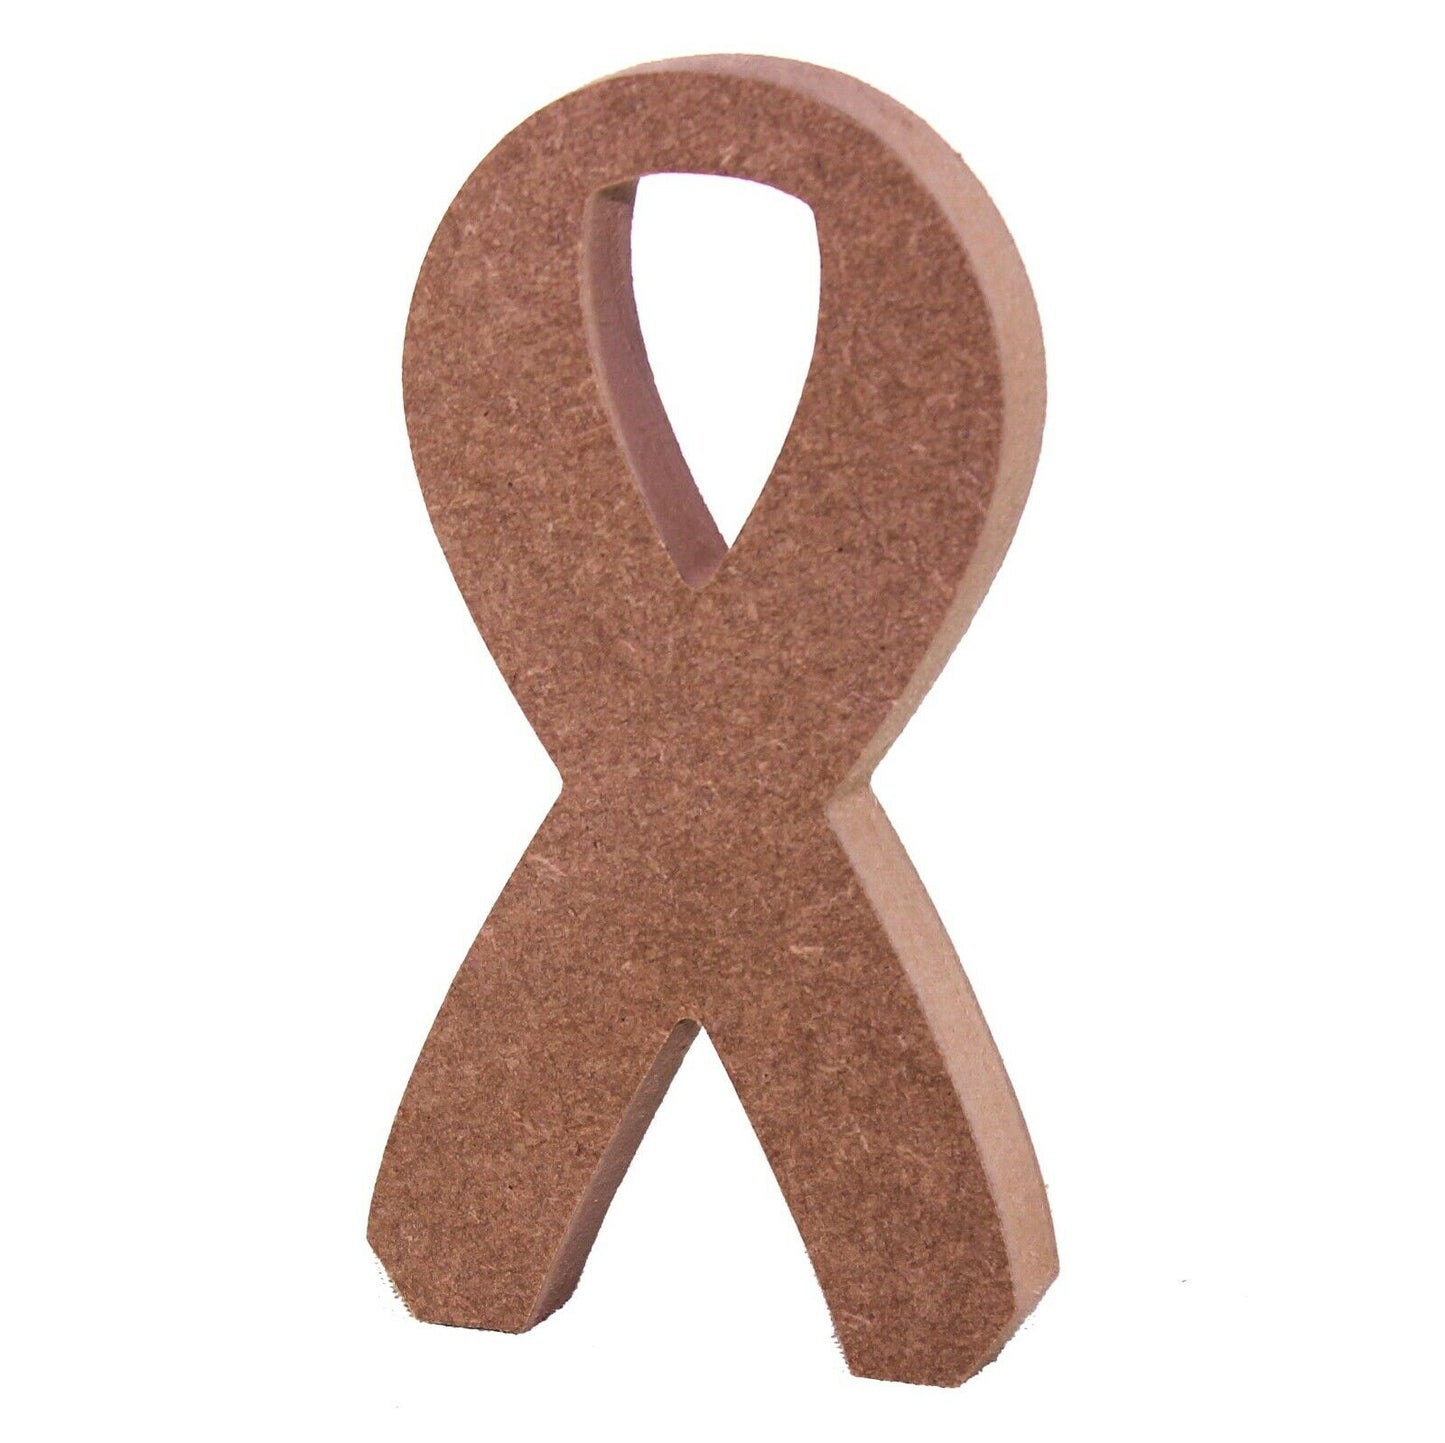 Free Standing 18mm MDF Support Ribbon Craft Shape Various Sizes. Charity